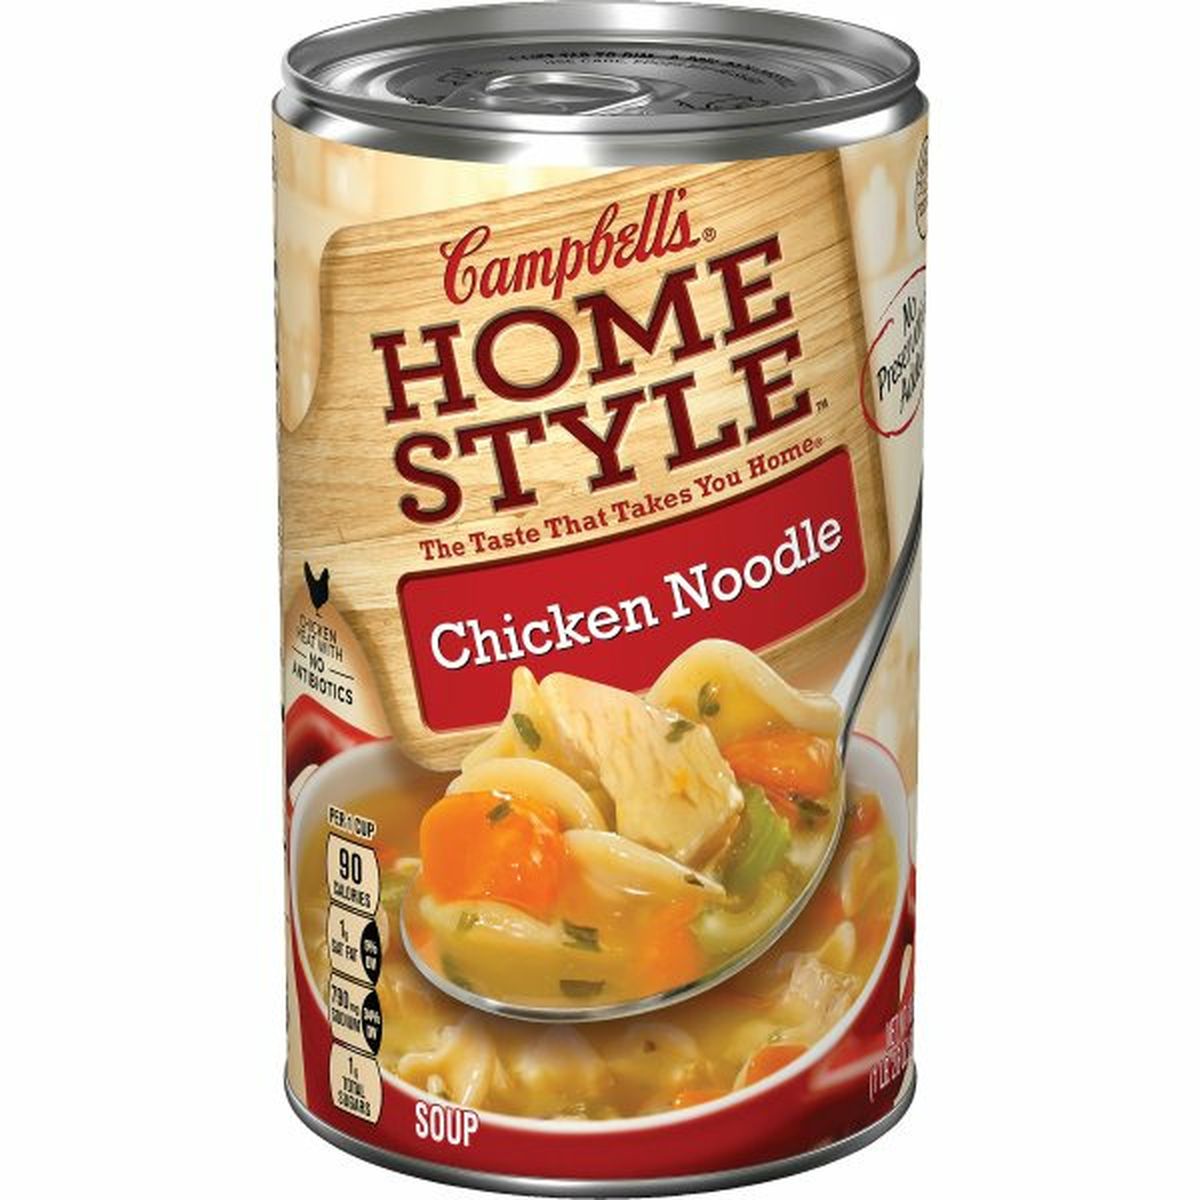 Calories in Campbell'ss Homestyle Homestyle Chicken Noodle Soup